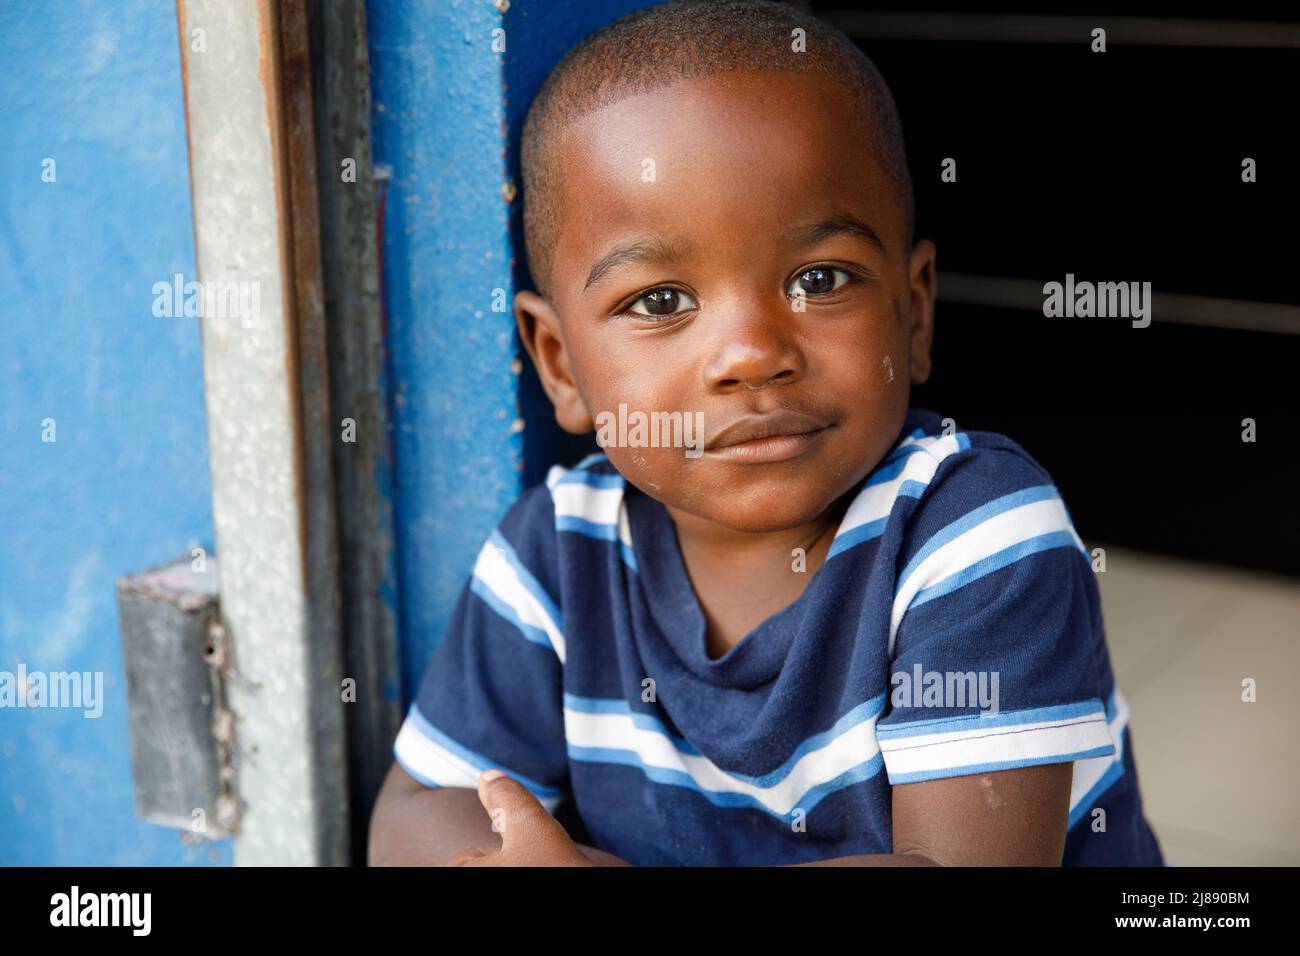 2022.03.14 Dominican Republic Punta Cana Bavaro. Portrait of a child. A little African-American boy looks into the camera and smiles. Dominican people Stock Photo